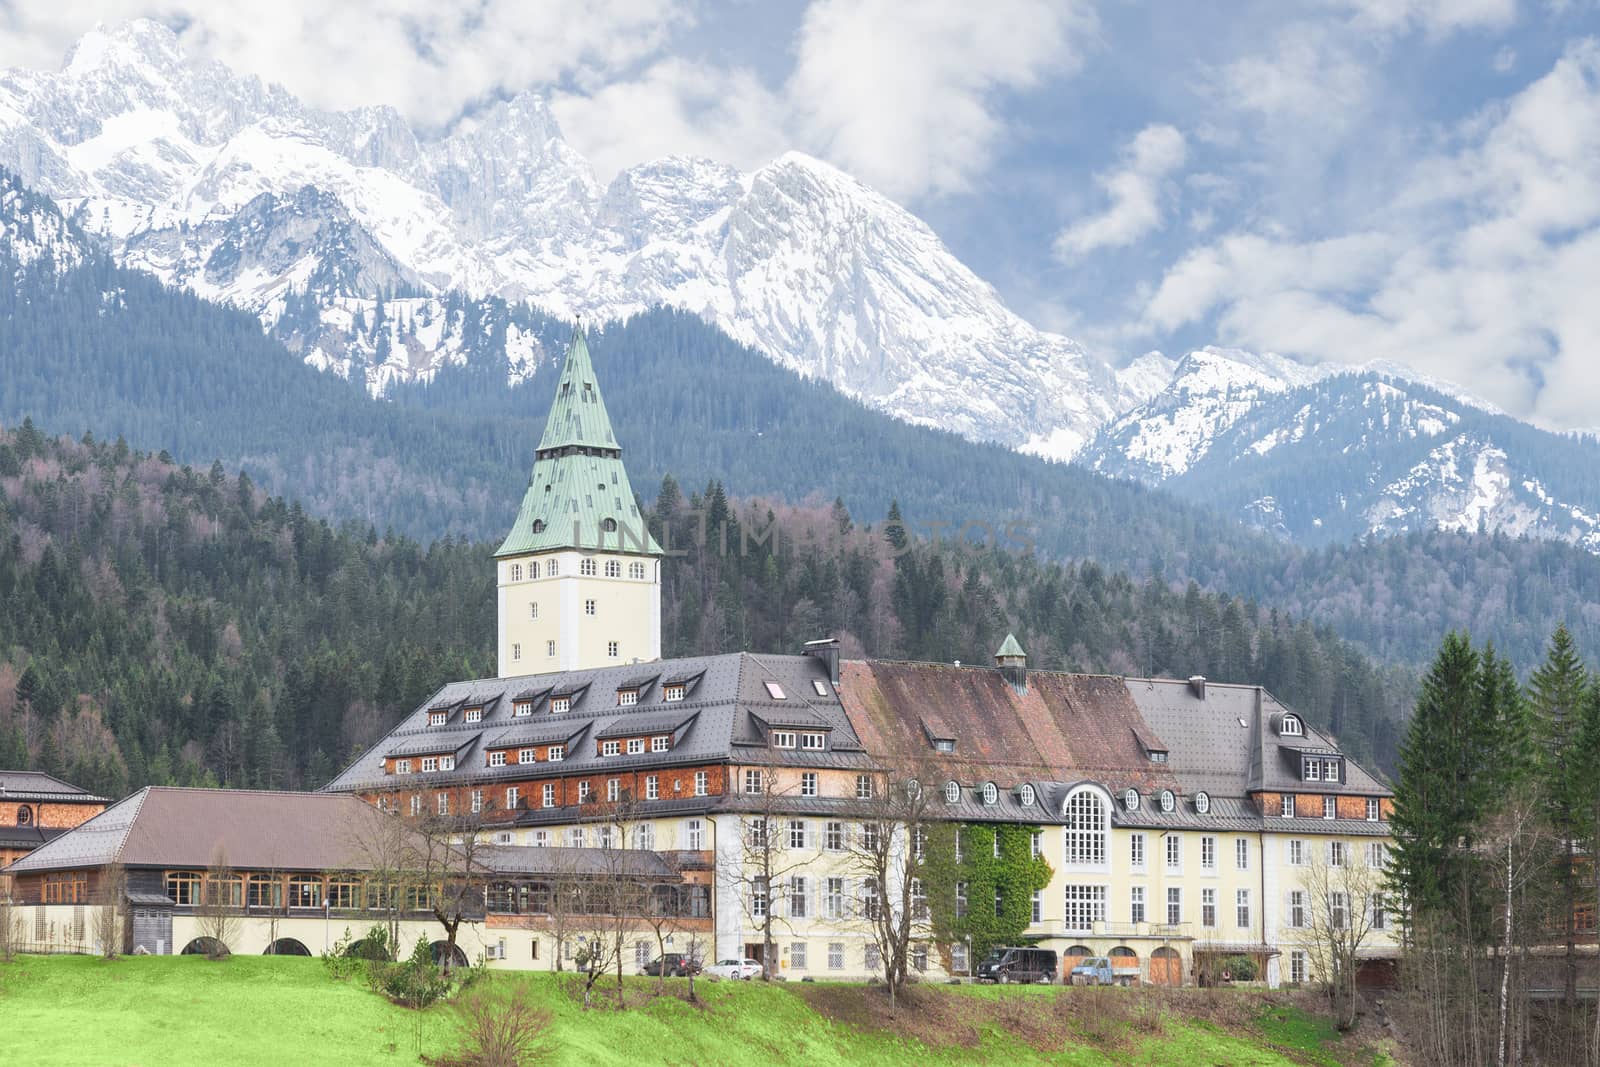 Garmisch-Partenkirchen, Germany - April 26, 2015: Bavarian hotel Schloss Elmau castle is the official conference venue of the 41st political G8 summit at June 2015 with the presidents and premiers of the most important nations of the world.